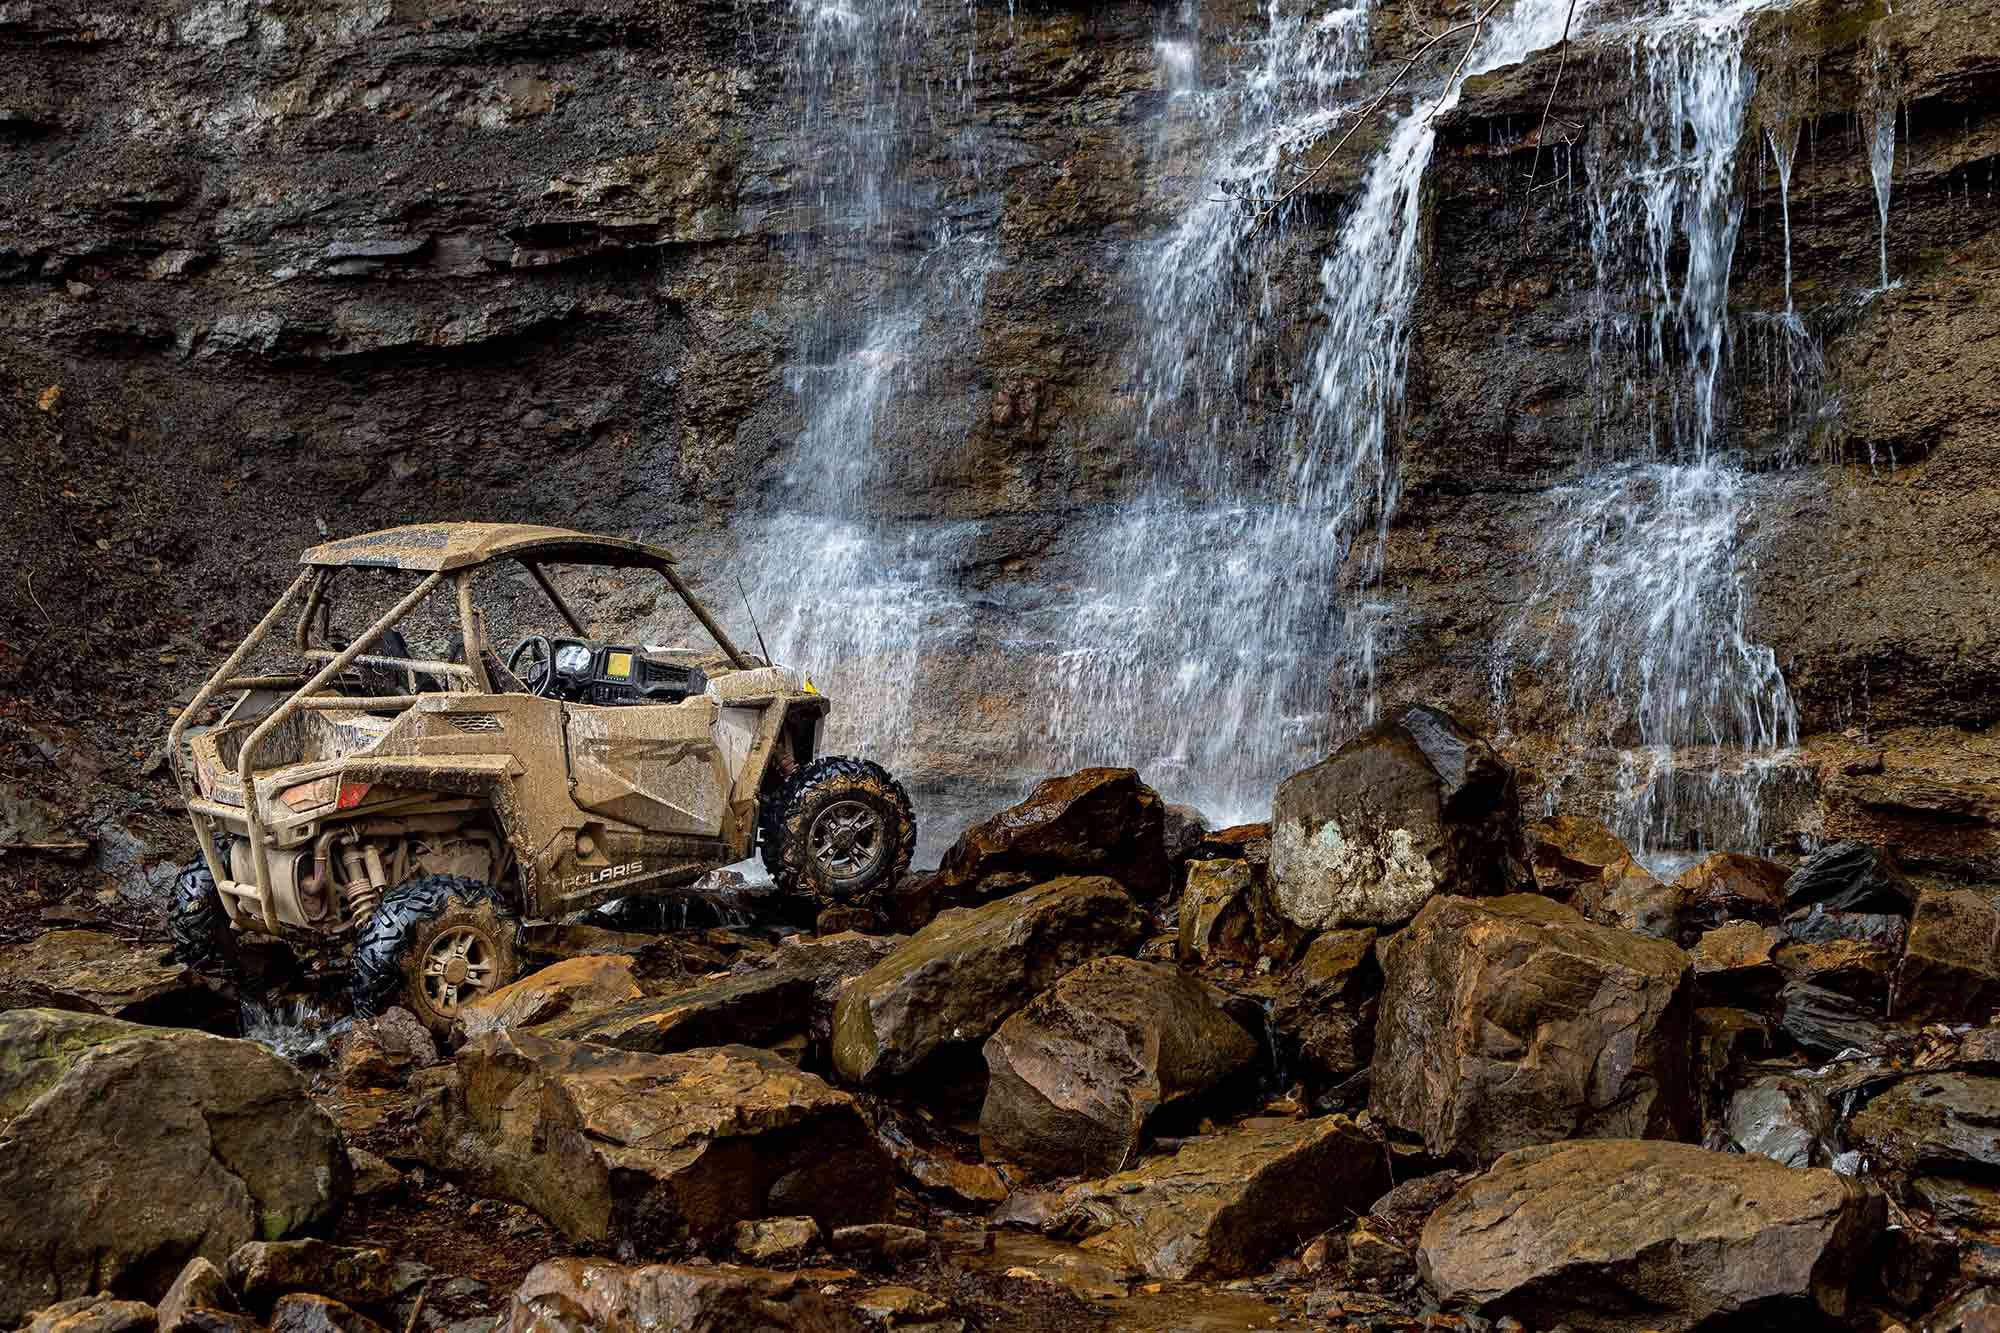 The newest round of UTVs makes you want to go chasing waterfalls.